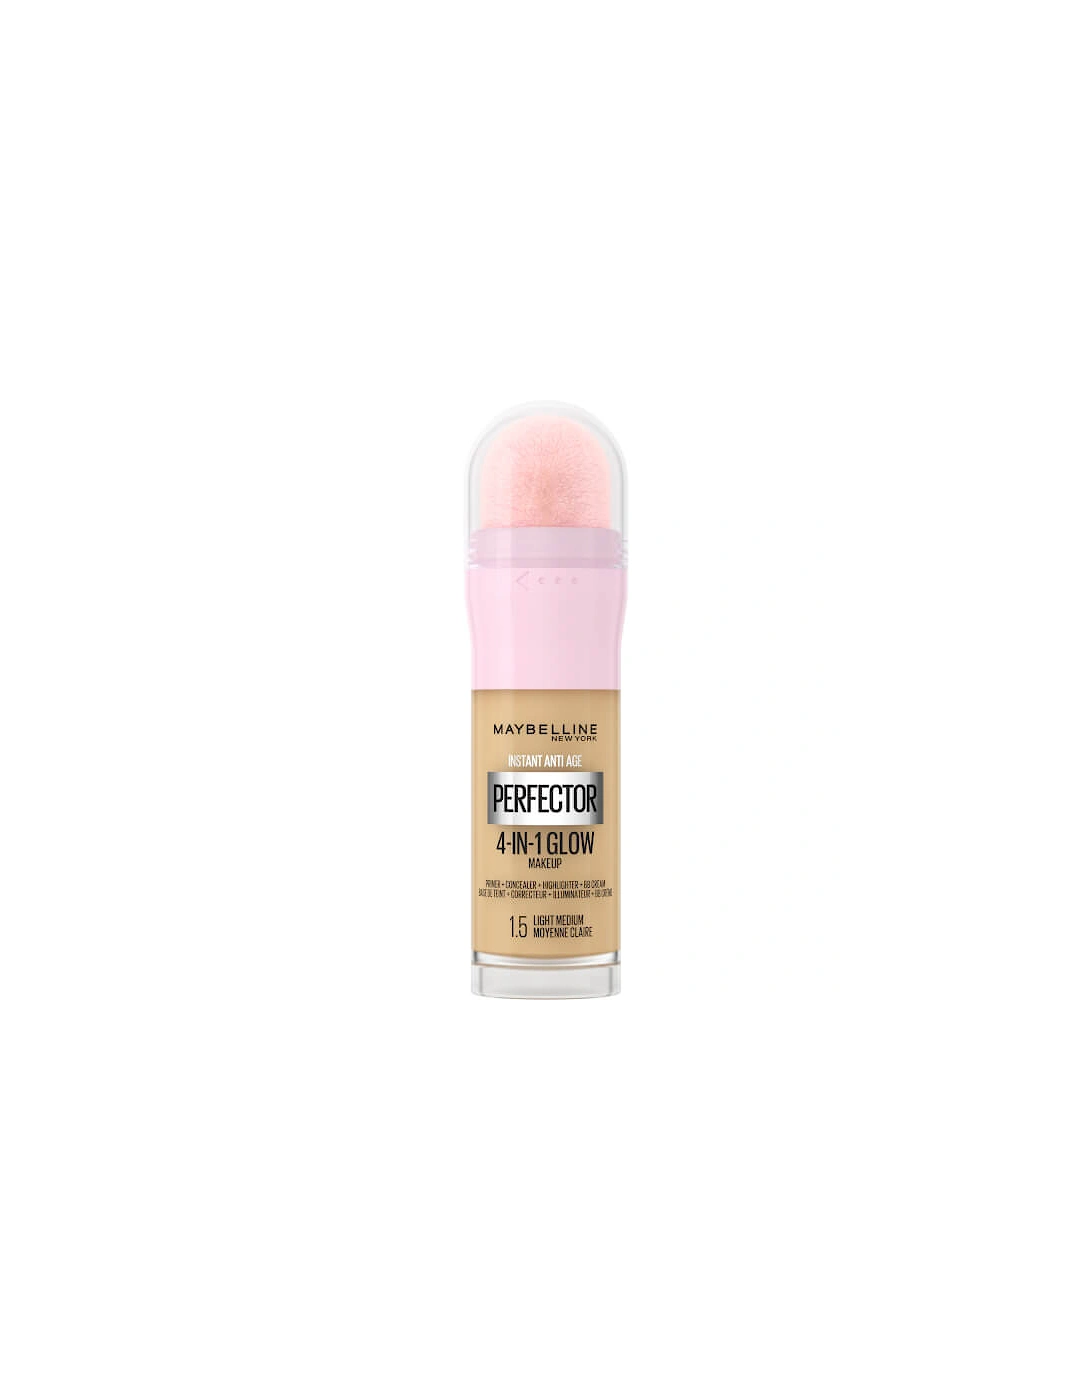 Instant Anti Age Perfector 4-in-1 Glow Primer, Concealer and Highlighter 118ml - Light Medium, 2 of 1